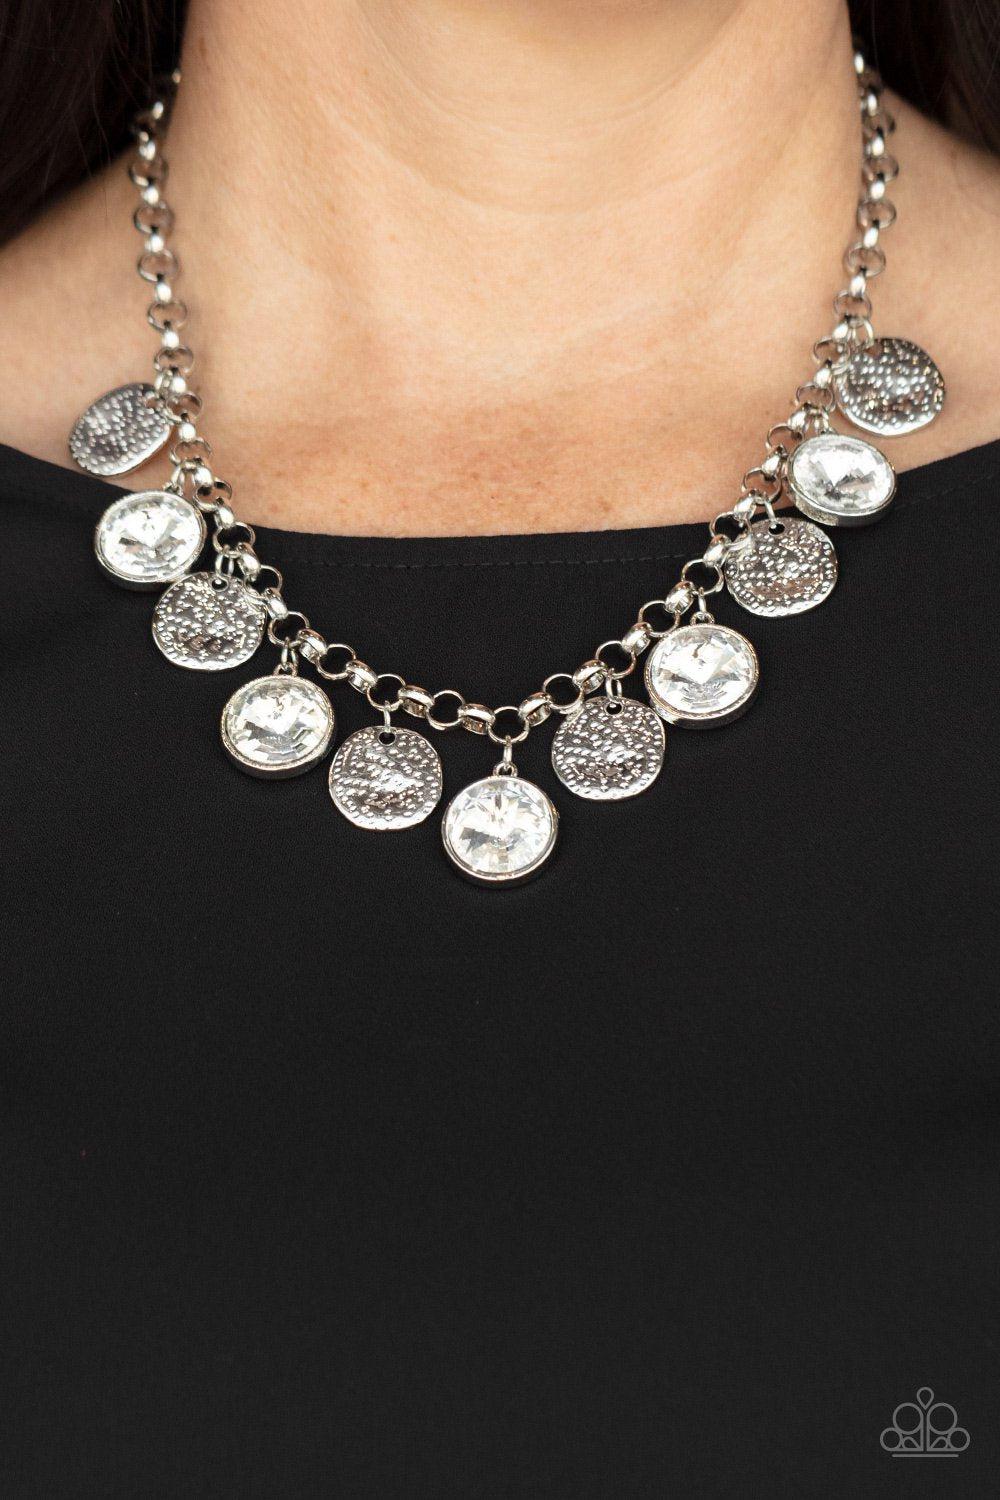 Spot On Sparkle White Rhinestone and Silver Necklace - Paparazzi Accessories 2021 Convention Exclusive- model - CarasShop.com - $5 Jewelry by Cara Jewels